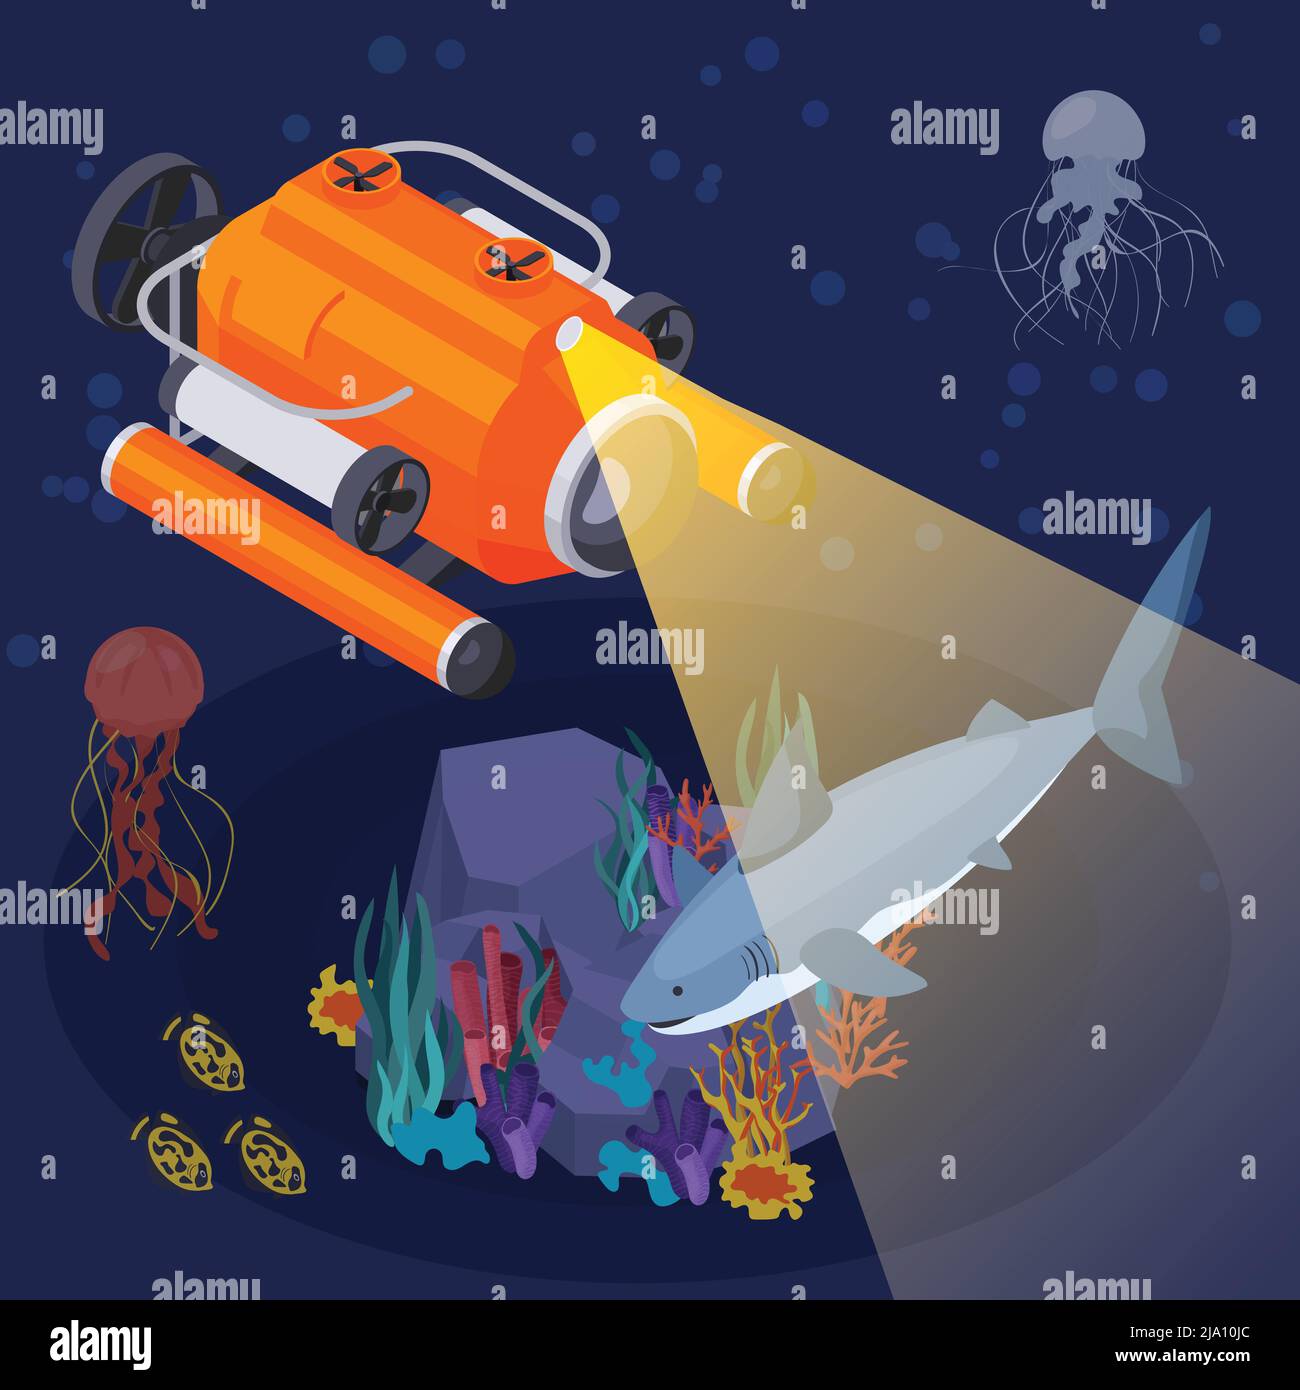 Underwater vehicles machines and equipment isometric composition ship shines a searchlight underwater at night vector illustration Stock Vector